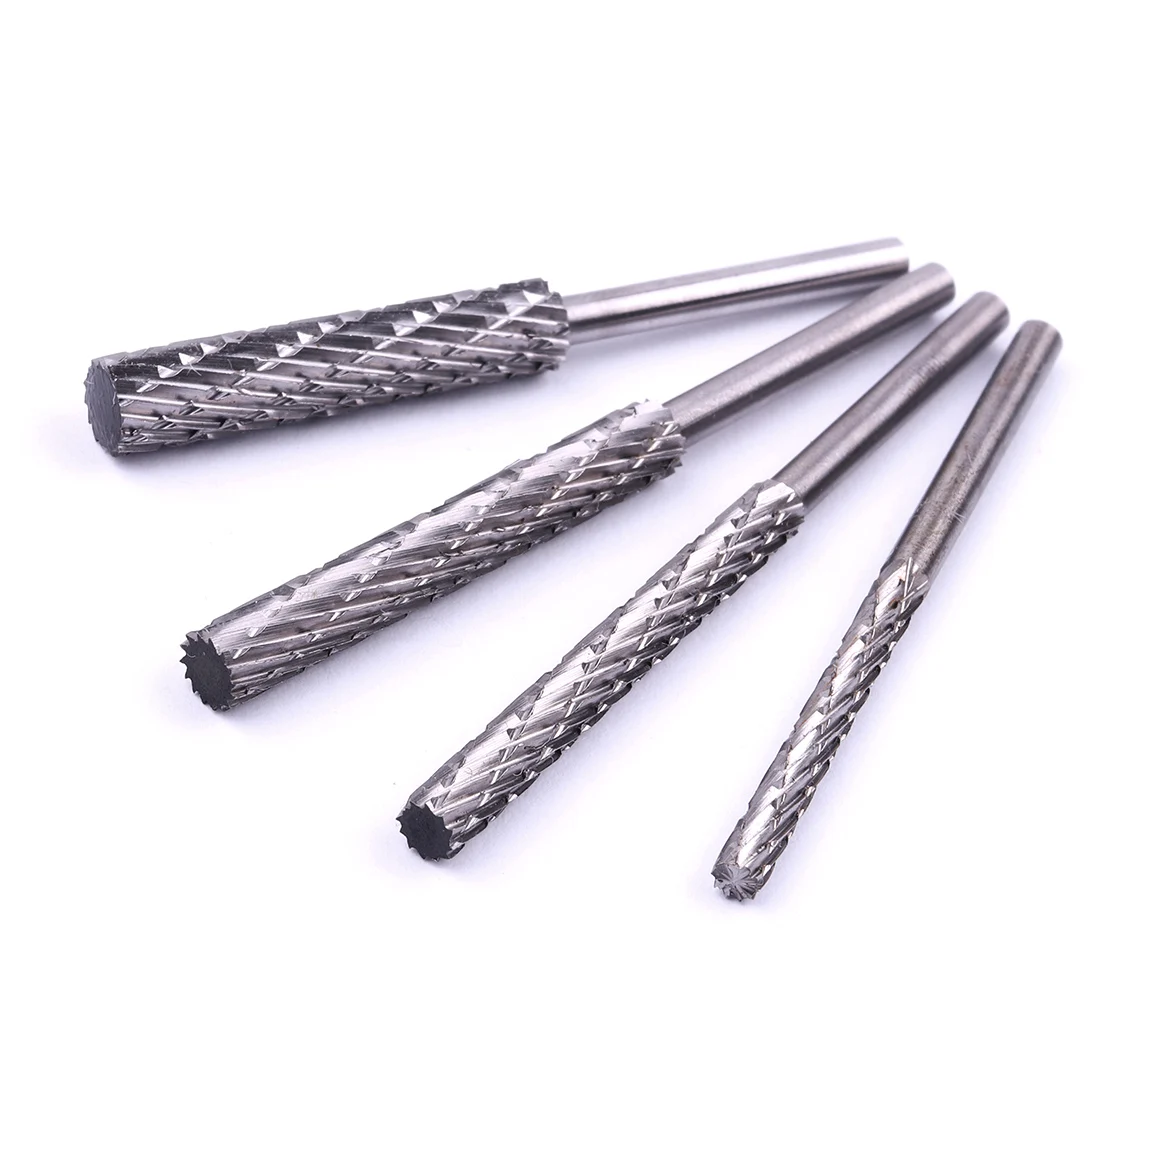 

1PC Rotary Burr Cutter High Speed Steel Rotary File 3x3/4/5/6mm for Dremel Accessories Milling Cutter Drill Bit Engraving Bits